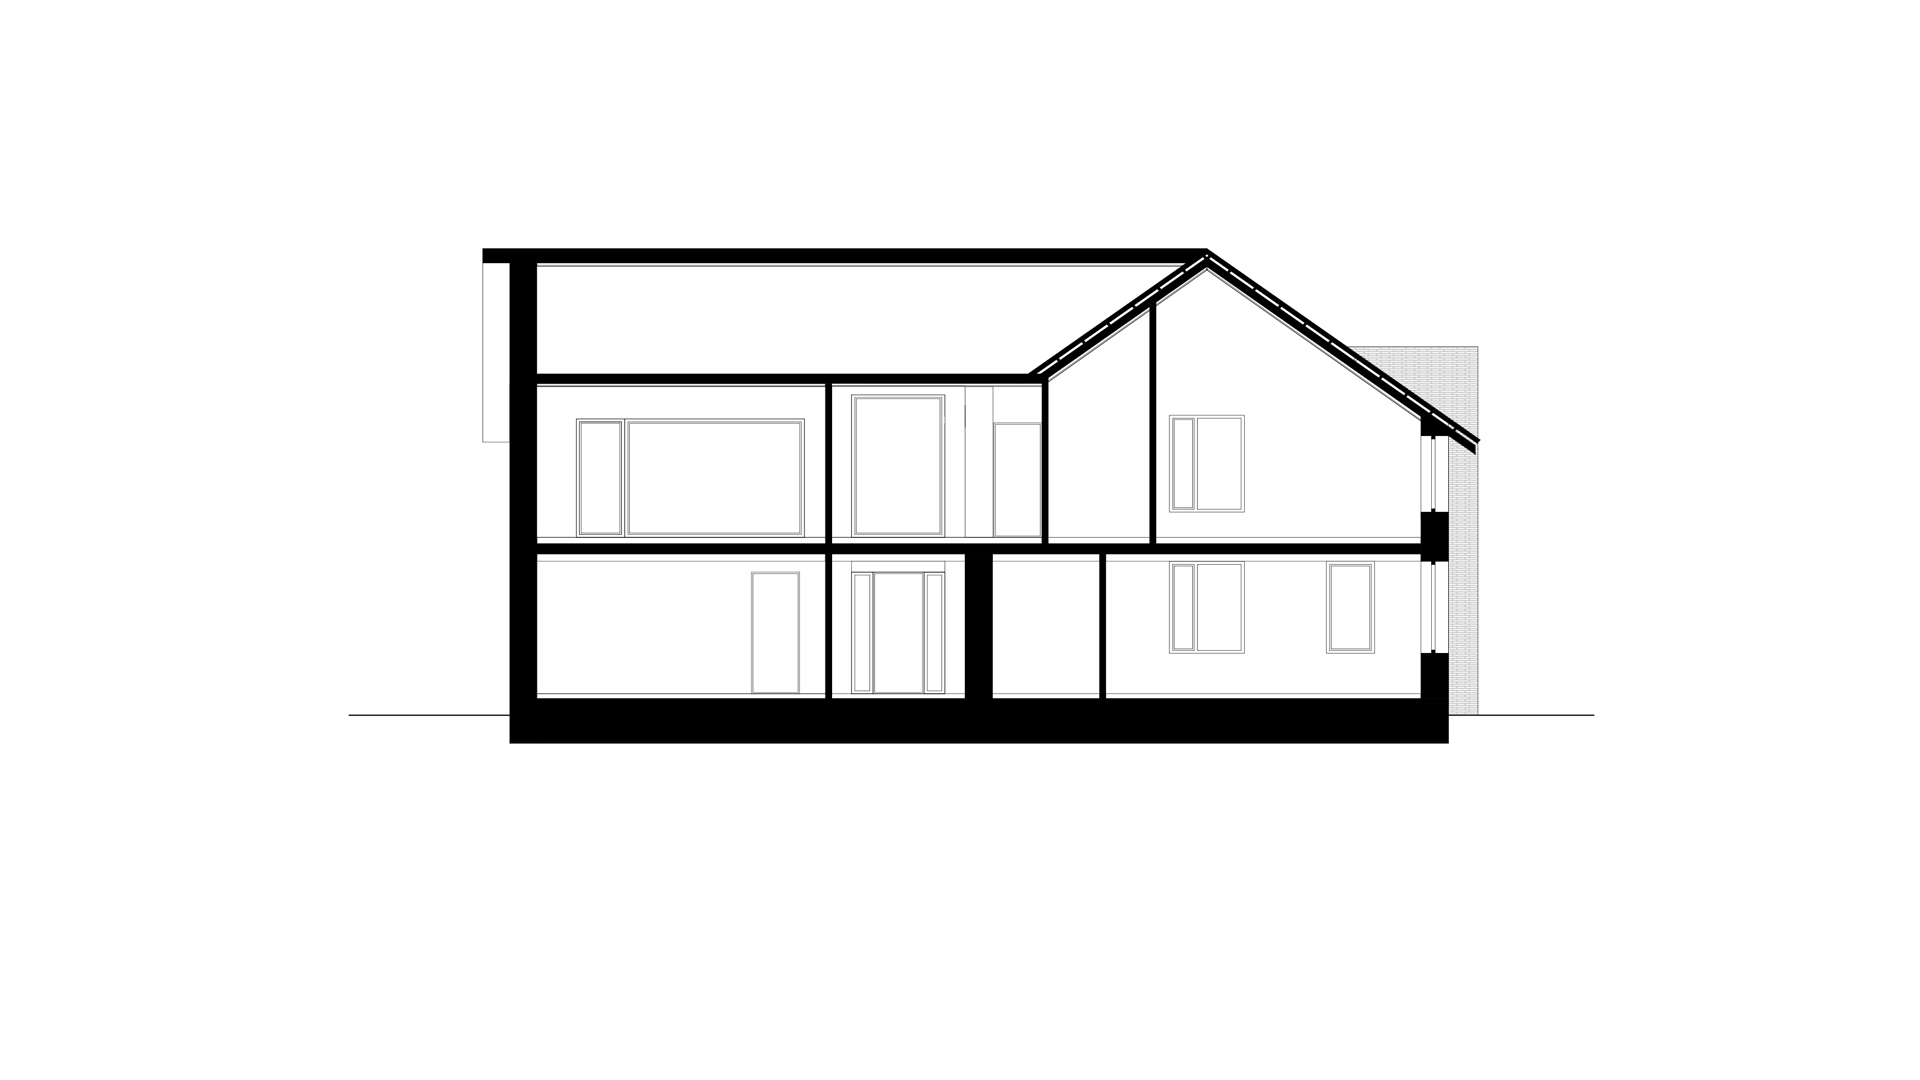 technical plan of the house